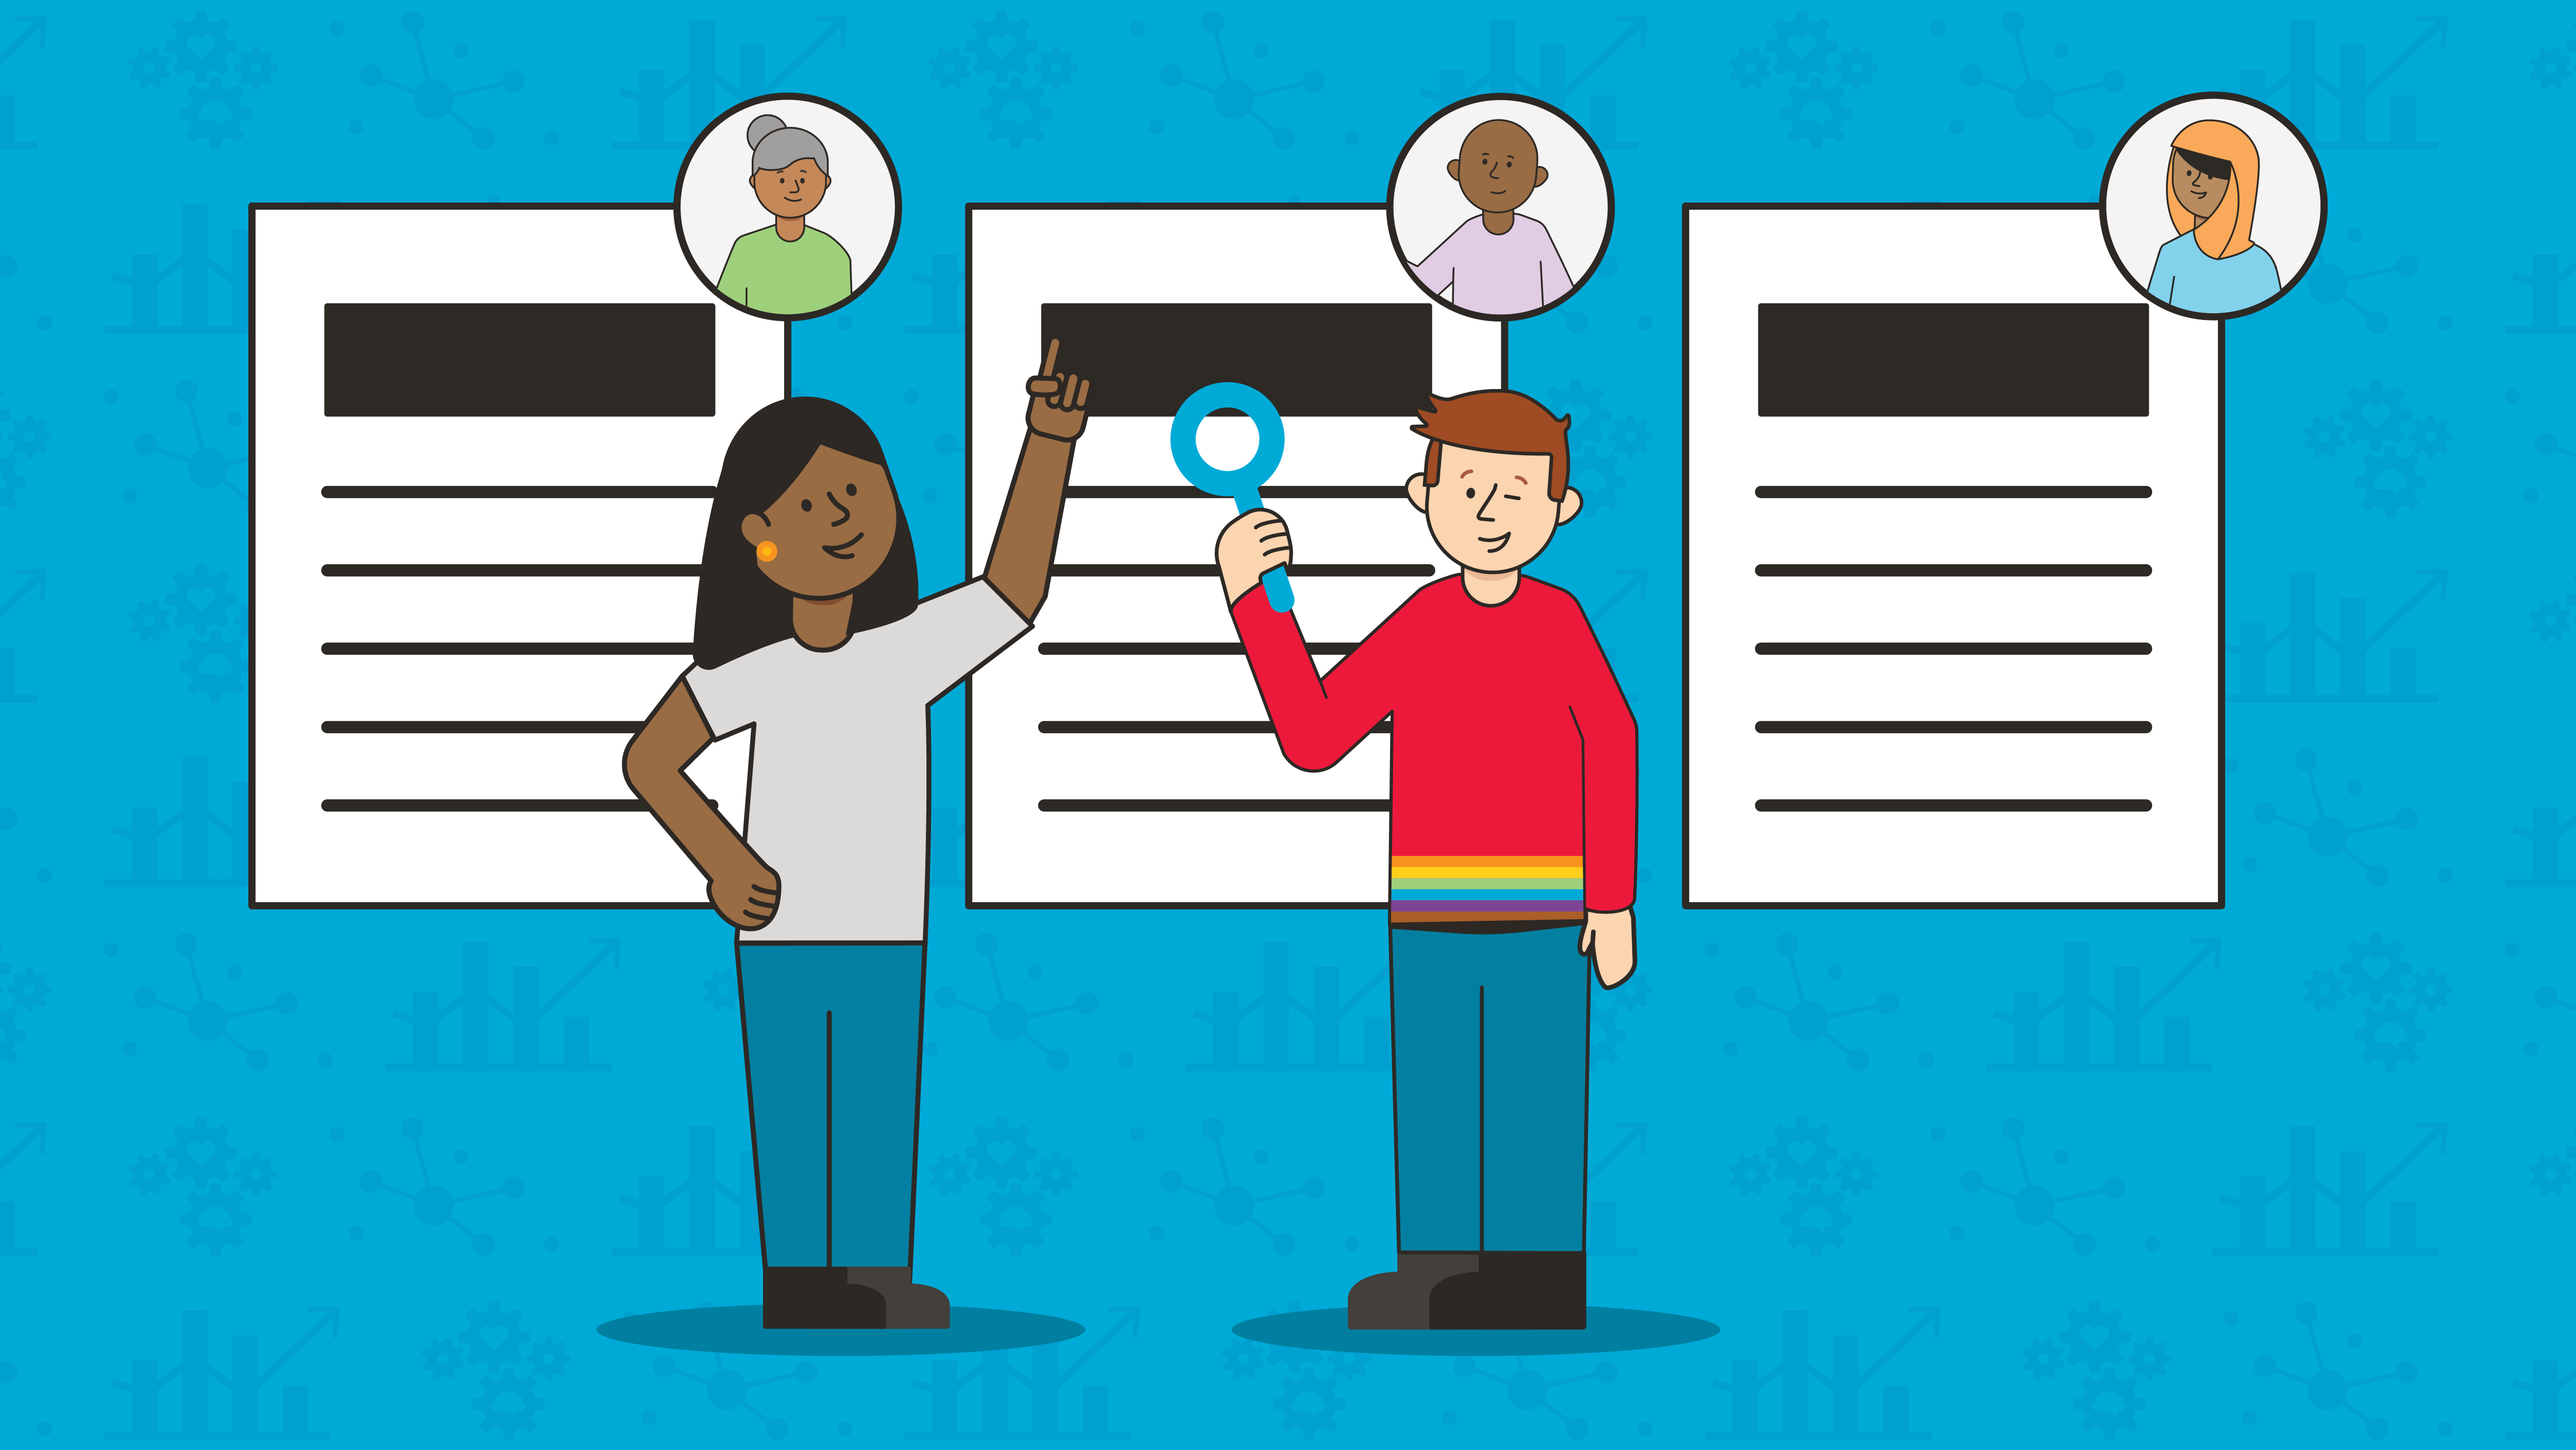 One white man with a rainbow shirt and red hair, and a black woman in a grey tshirt stand in front of a set of diverse resumes. Set in front of a blue background with icons representing the equity lens